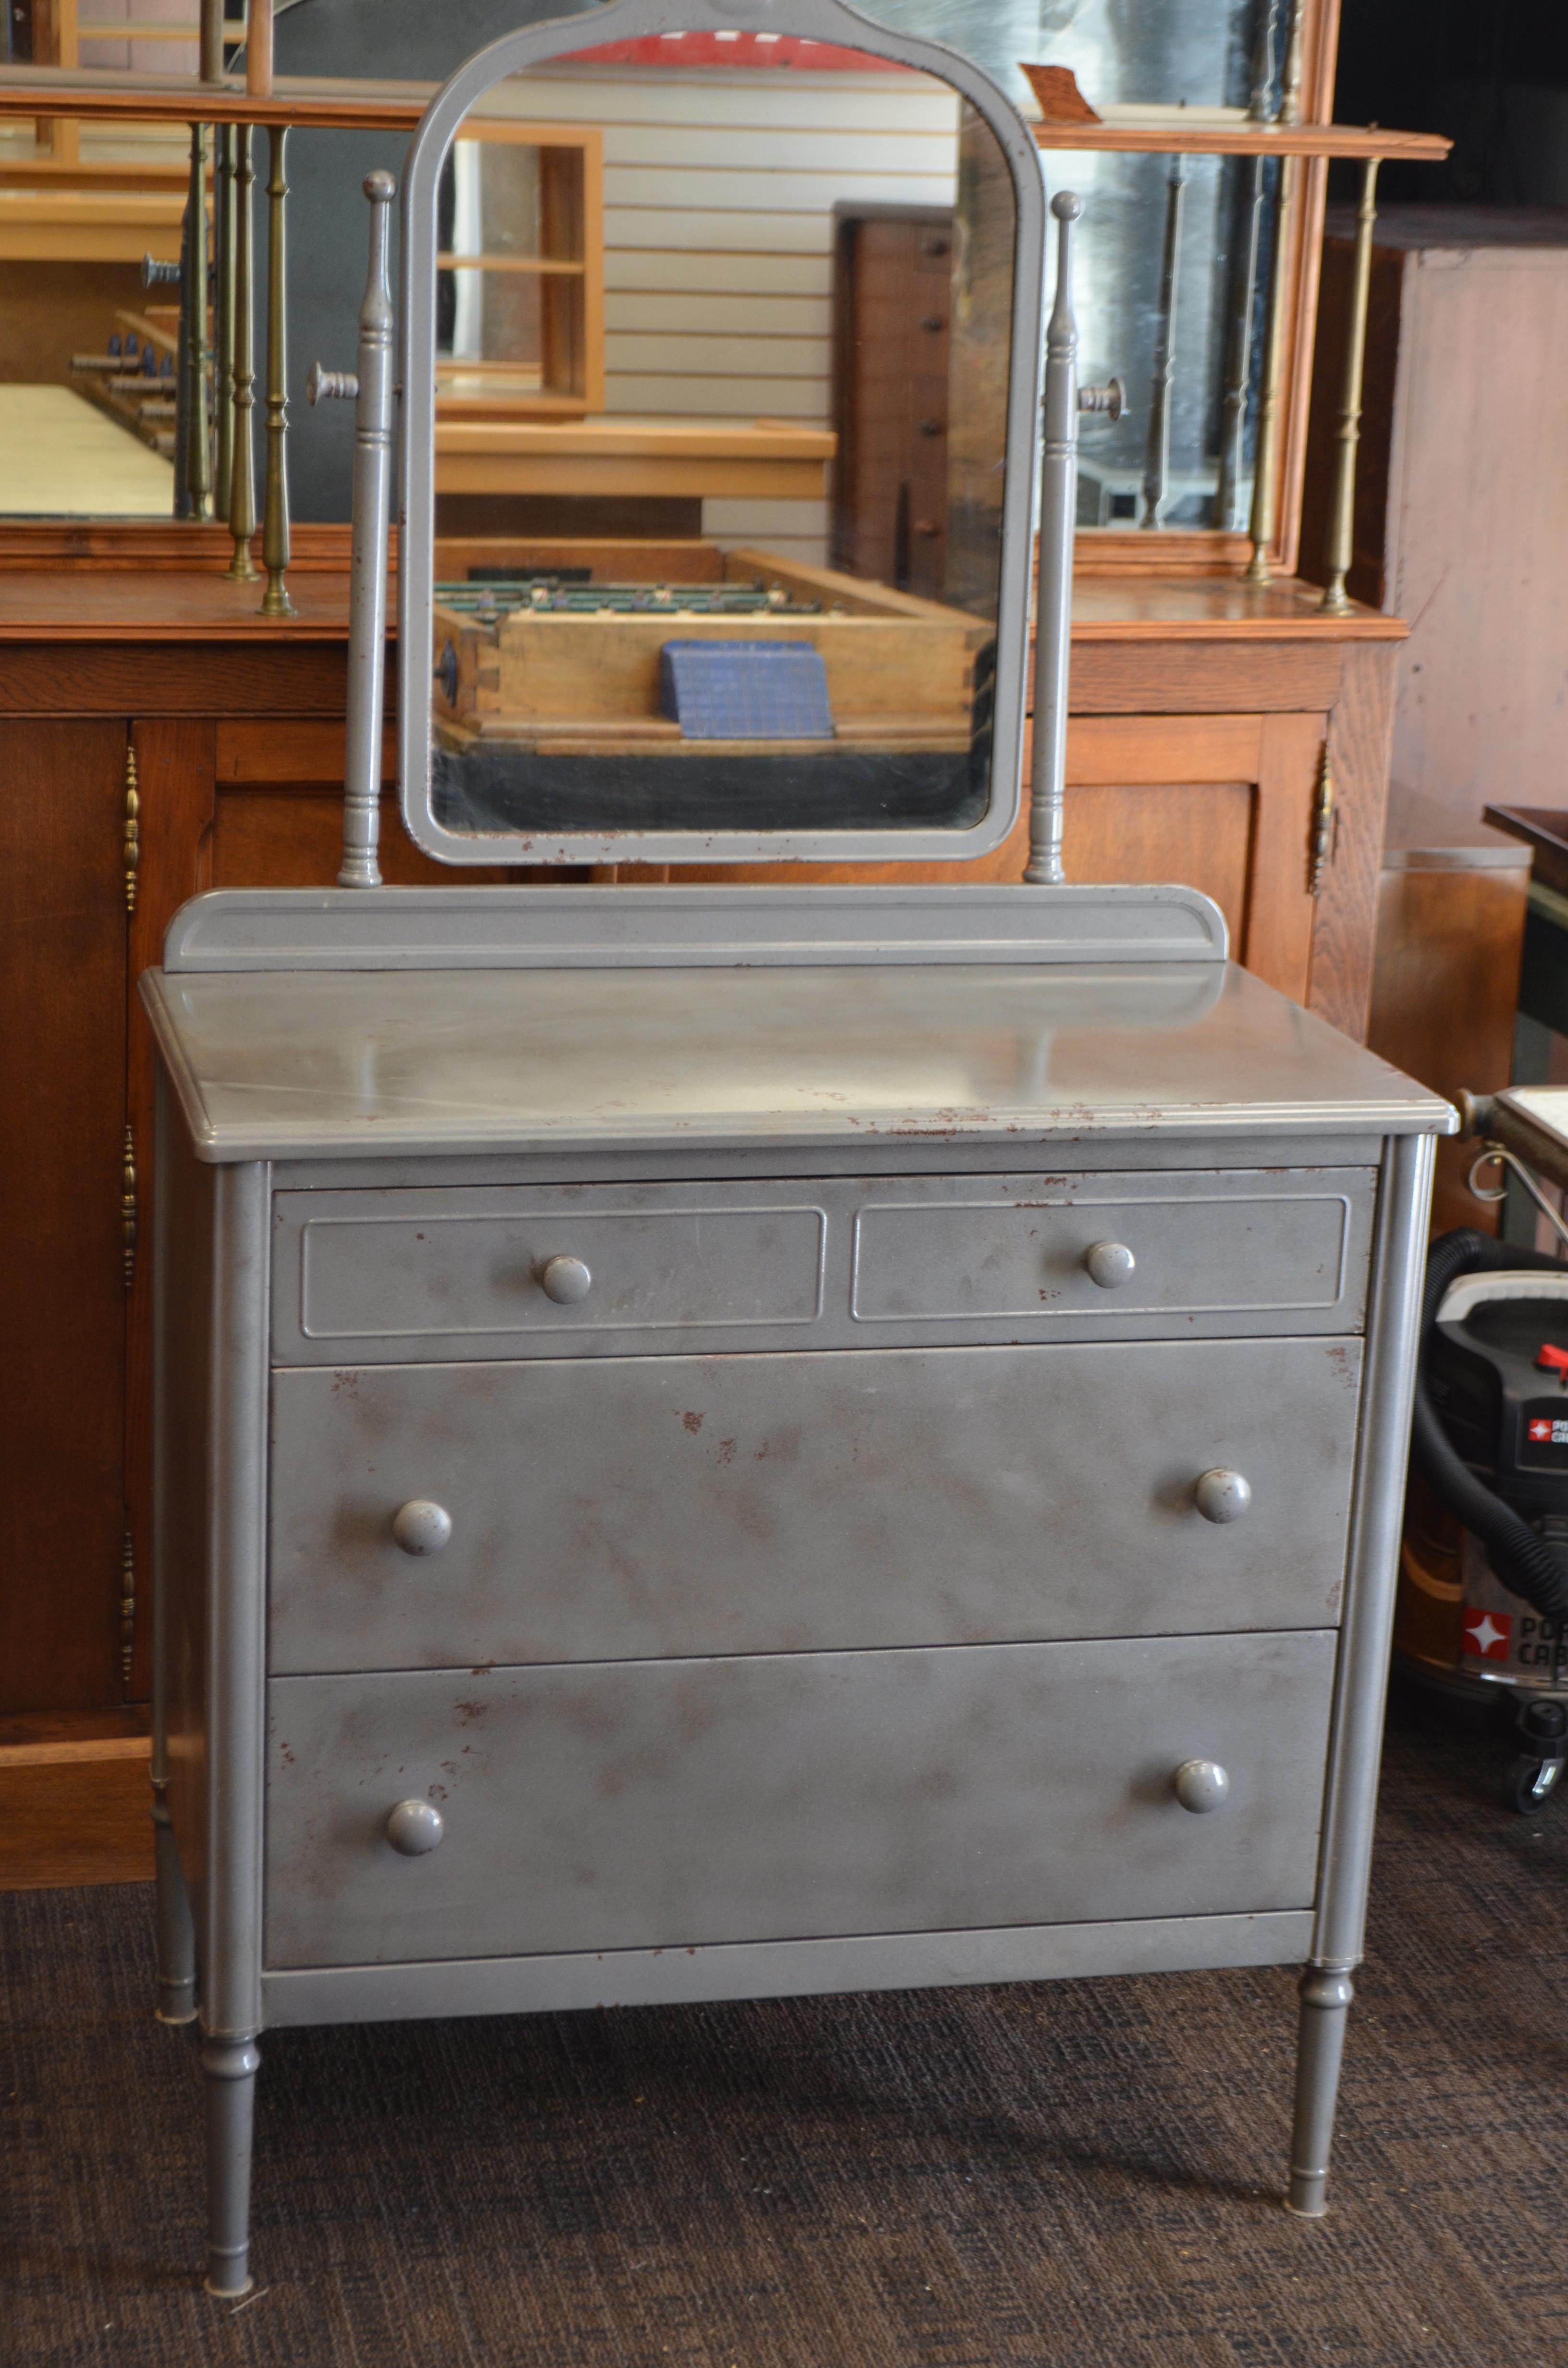 Steel dresser with mirror by Simmons. From a Chicago hotel that opened in the 1930s. Dresser has been refurbished. Drawers slide in and out with ease. Height of dresser to top of the mirror is 64.0 inches.